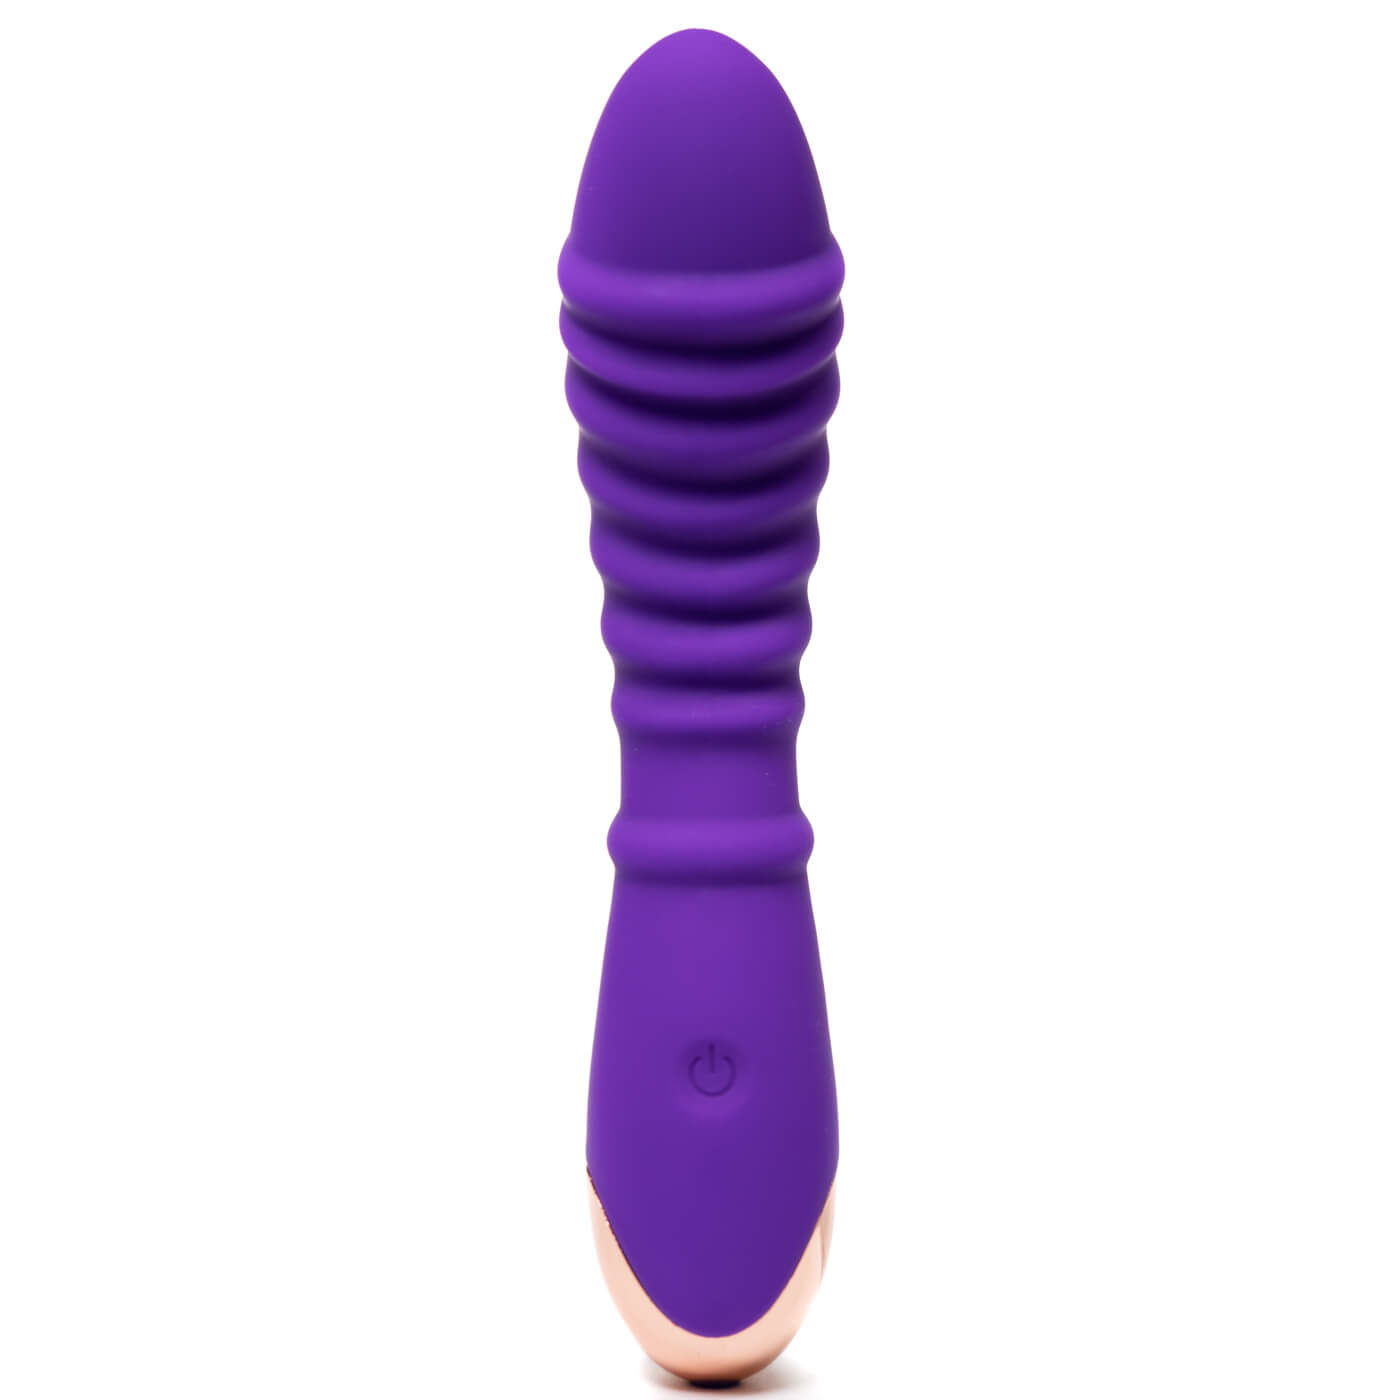 GRAVITATE 20 Function Powerful Rechargeable Waterproof G-Spot Vibrator